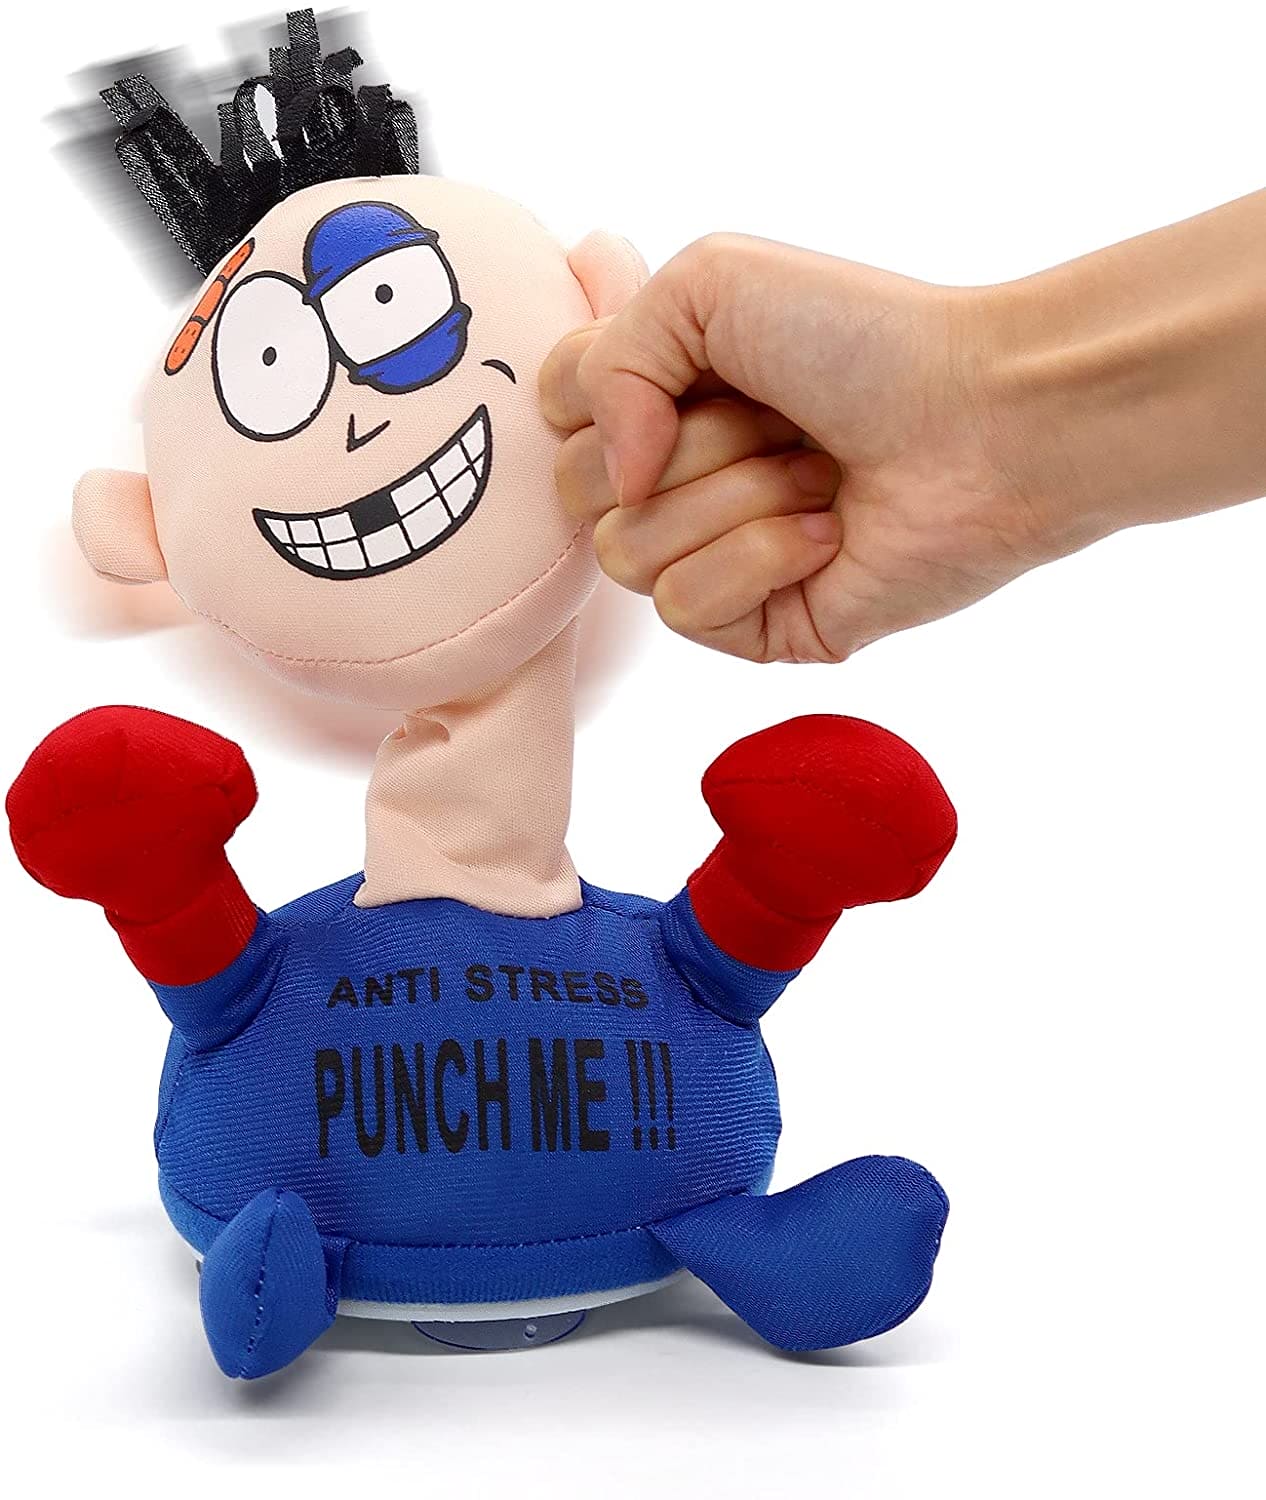 Funny Electronic Punch Me Anti Press Doll, Desktop Stress Relief for Adults Interactive Toy, Funny Children Boxing Toys, Punch Me Electric Plush Toys, Girls Creative Vent Screaming Doll, Punching And Screaming Sound Vent Toys, Cute Stuffed Toy